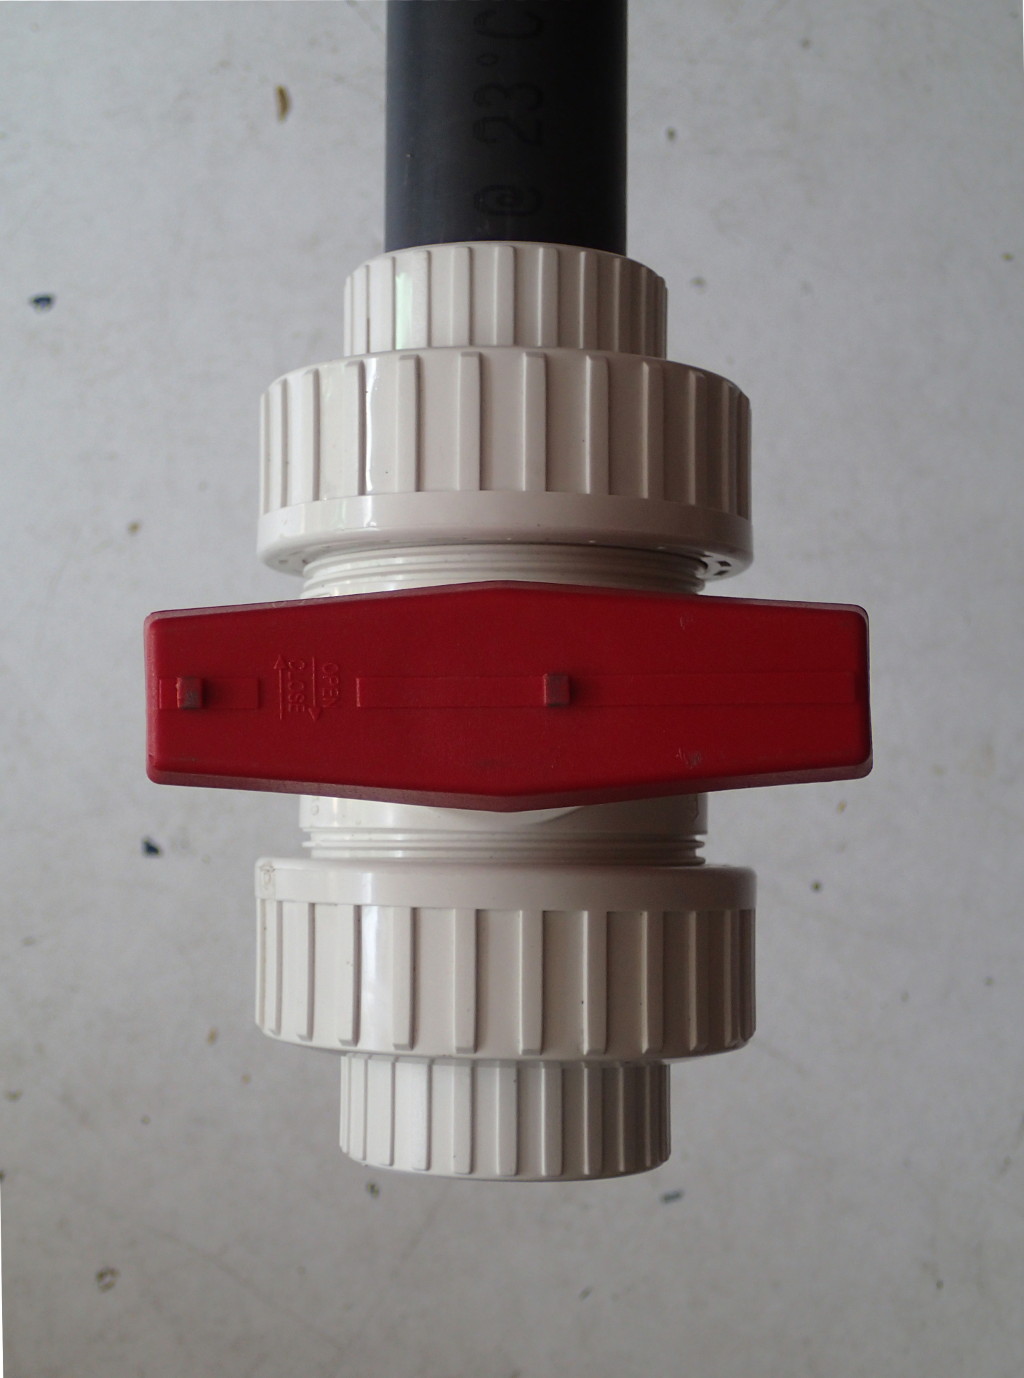 Here is a typical ball valve, shown in the closed position leftmost,and